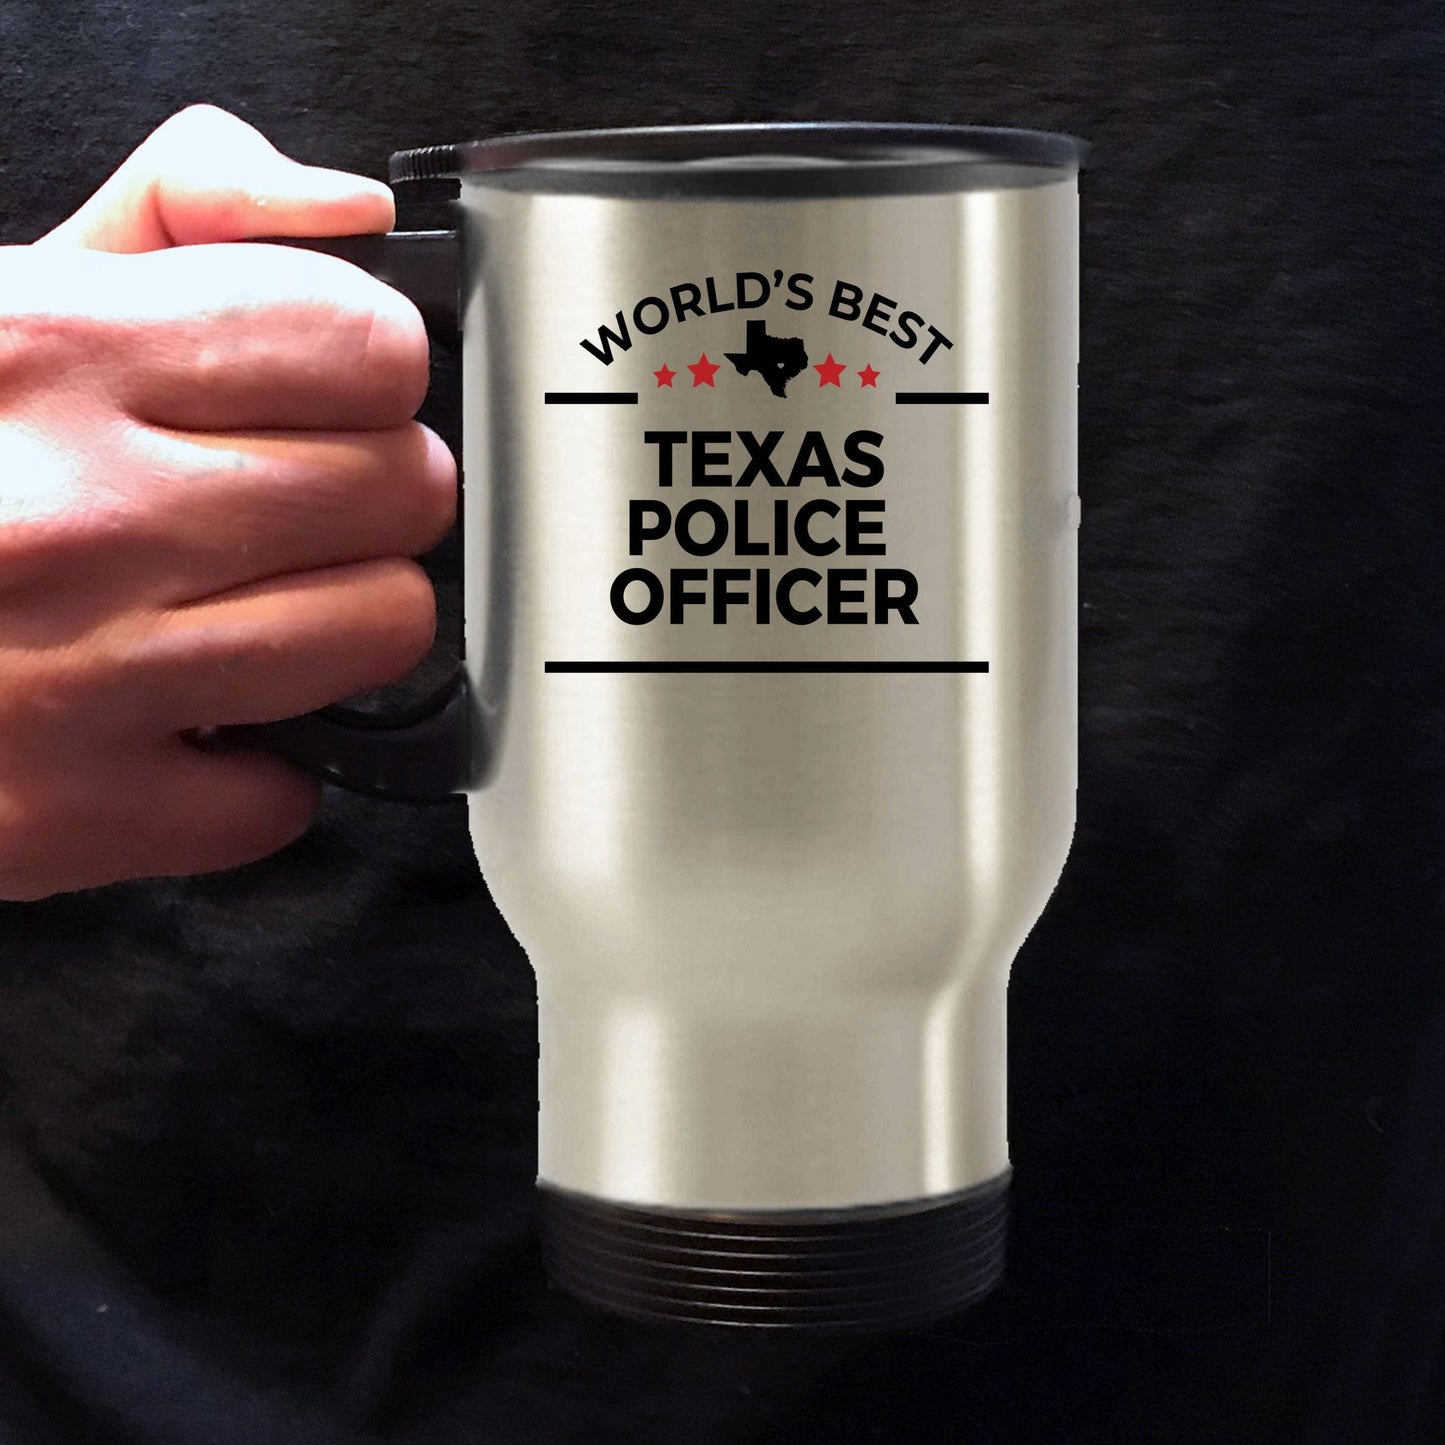 Texas Police Officer Gift World's Best Stainless Steel Insulated Travel Coffee Mug